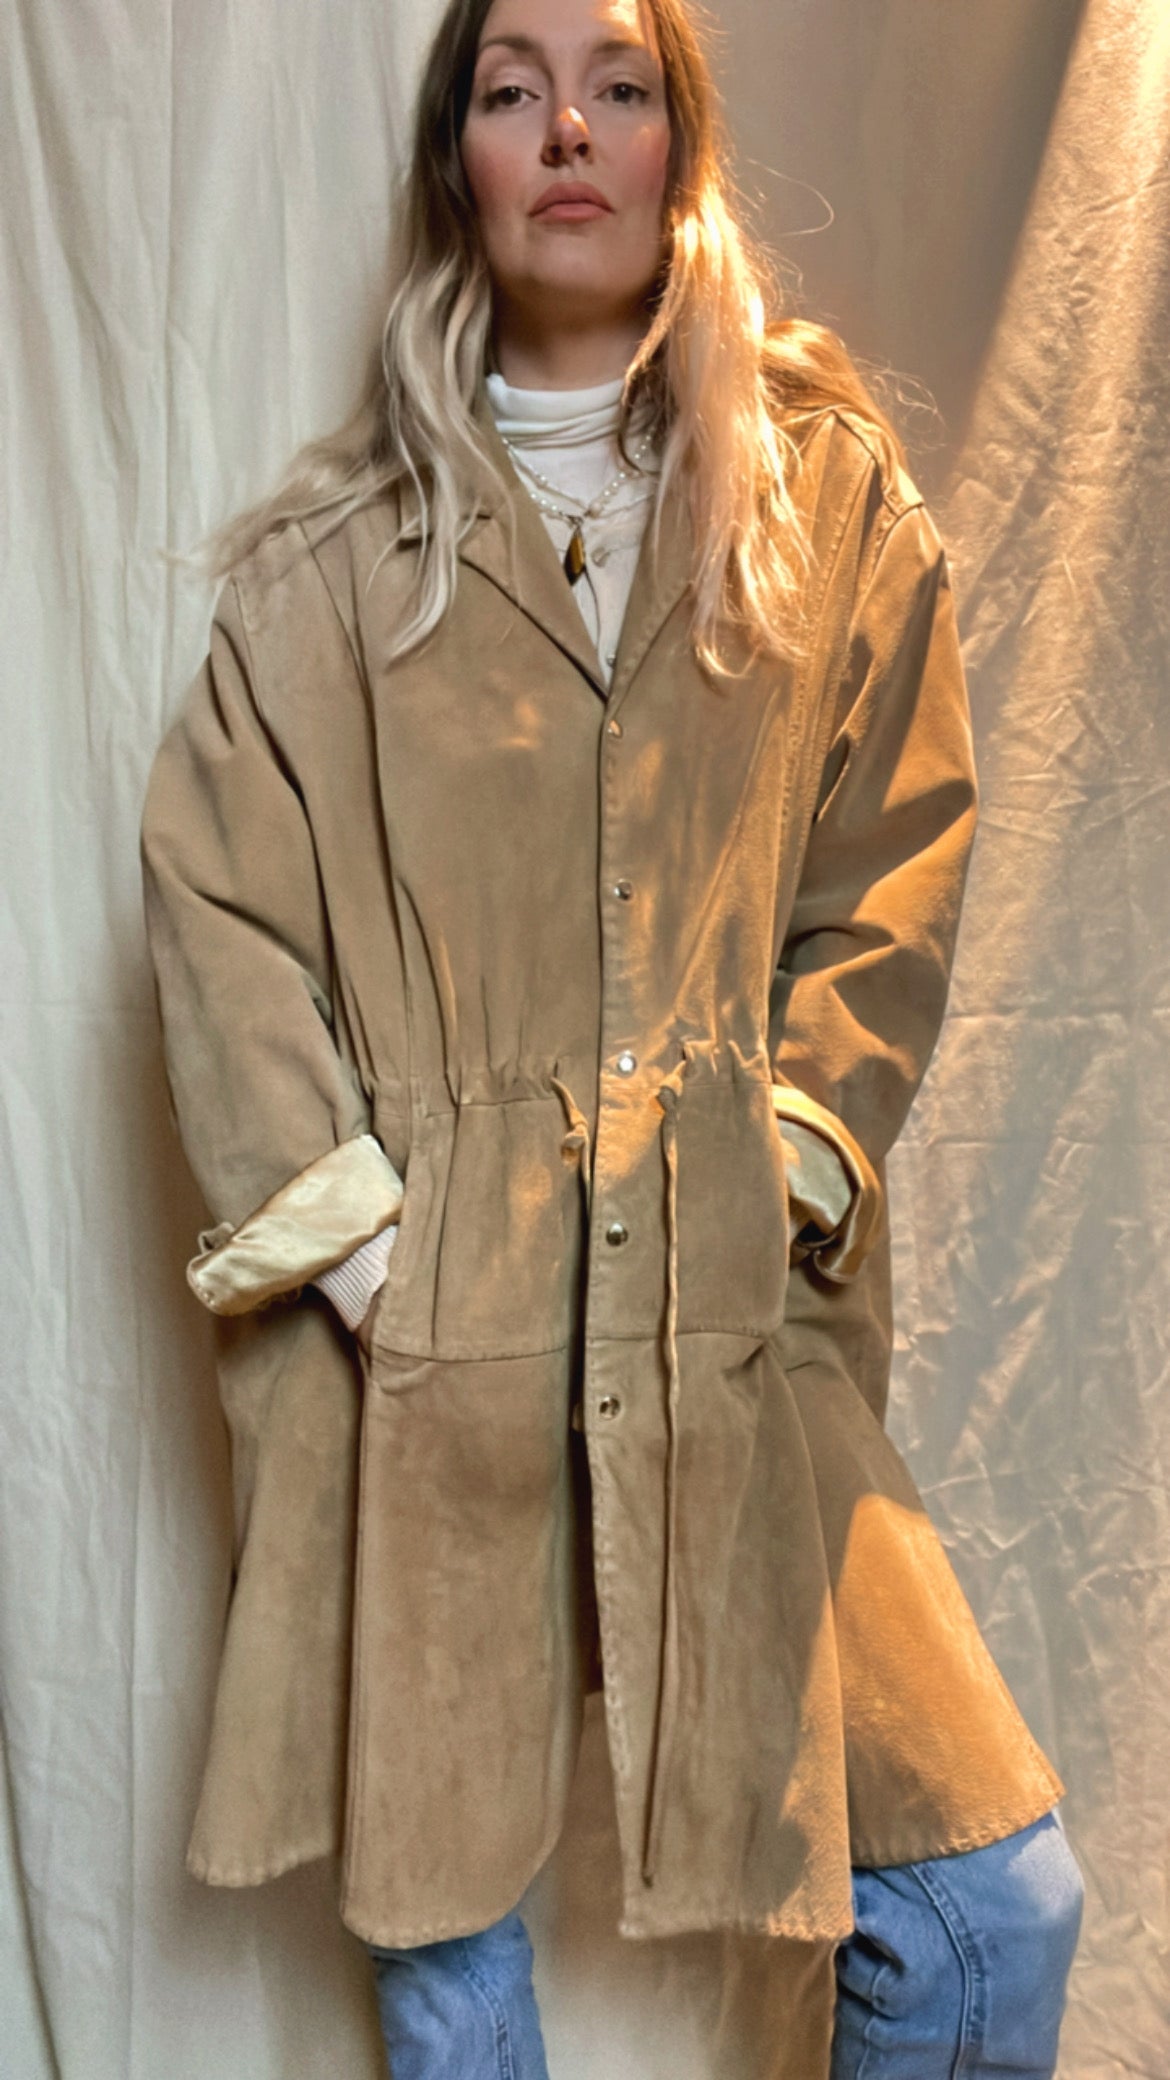 Leather trench